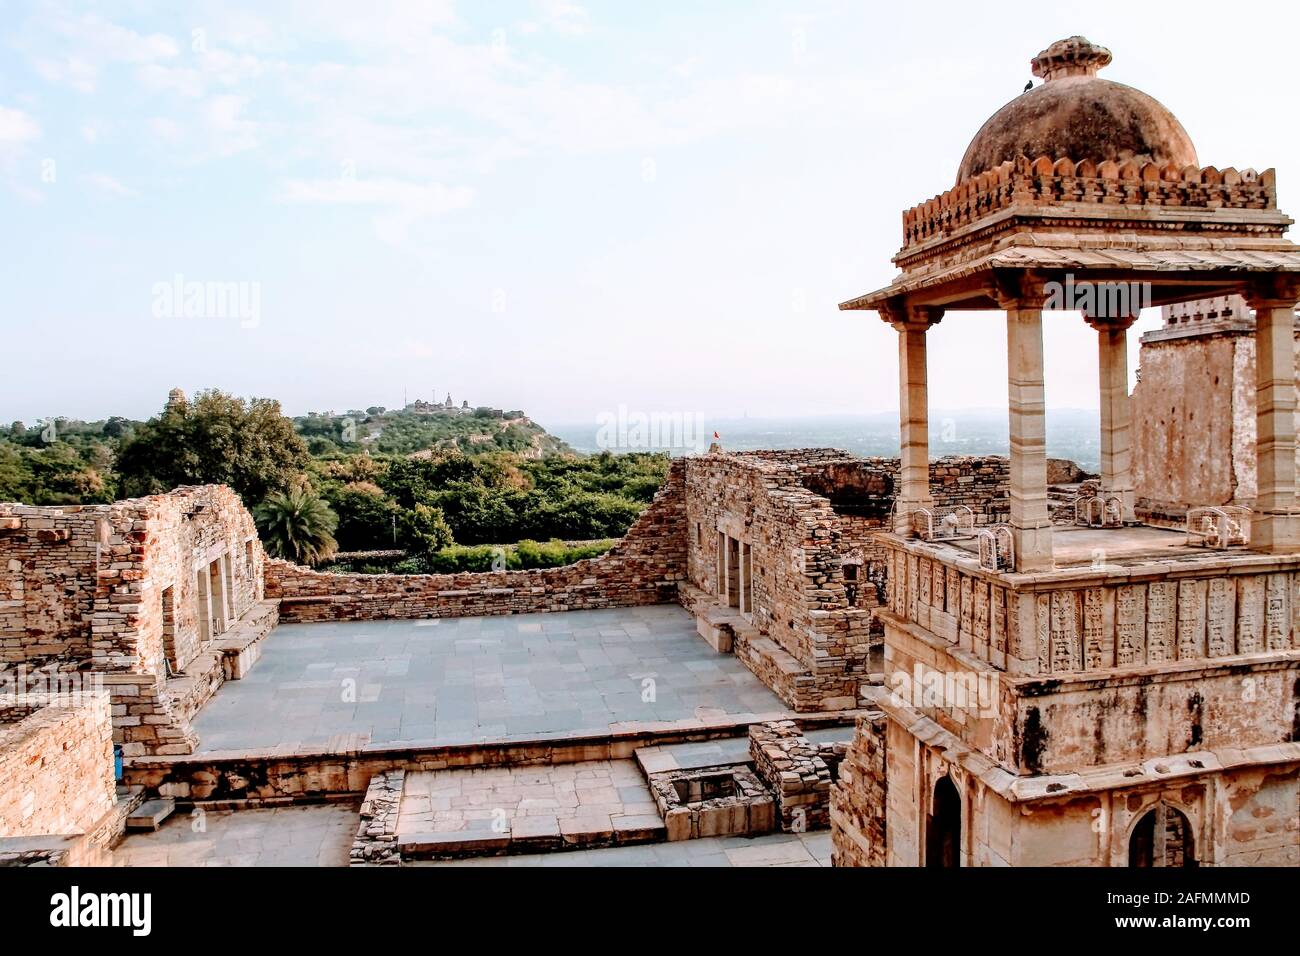 Chittorgarh Fort is one of the largest forts in India. It is a UNESCO World Heritage Site.The fort was the capital of Mewar. Stock Photo